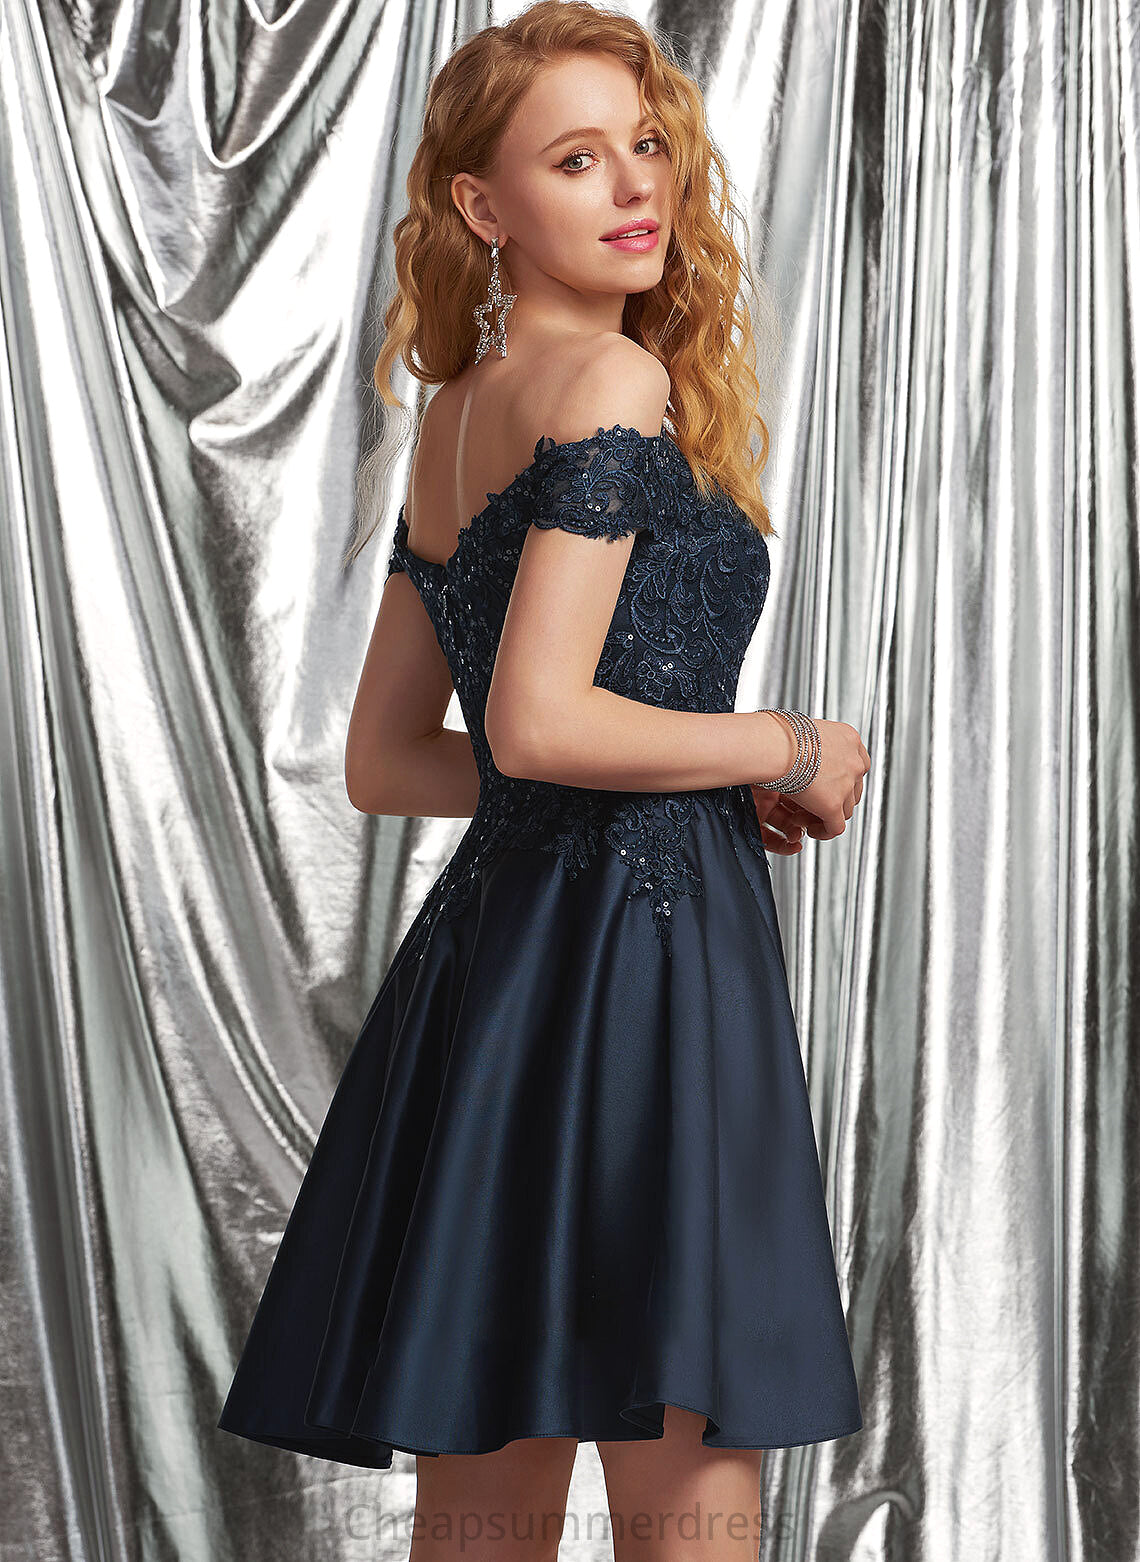 Diana Short/Mini Satin Lace Prom Dresses A-Line Off-the-Shoulder With Sequins